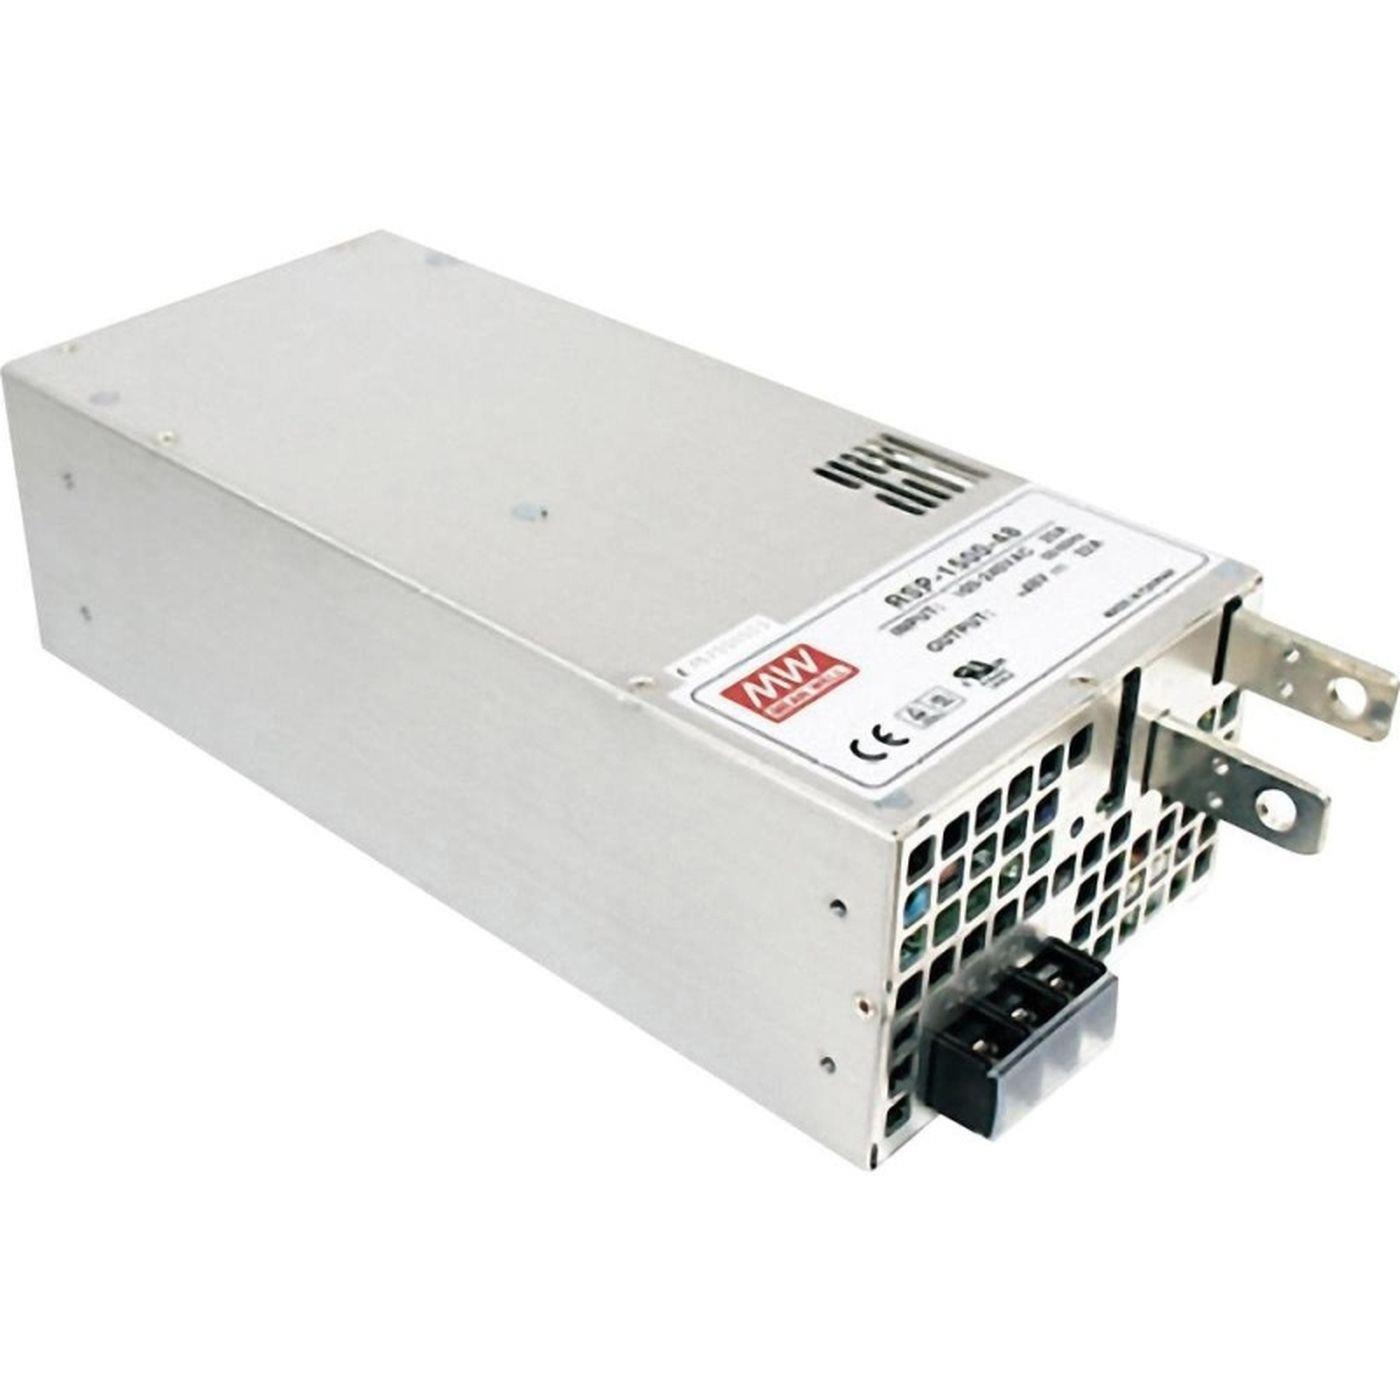 RSP-1500-24 1500W 24V 63A Industrial power supply